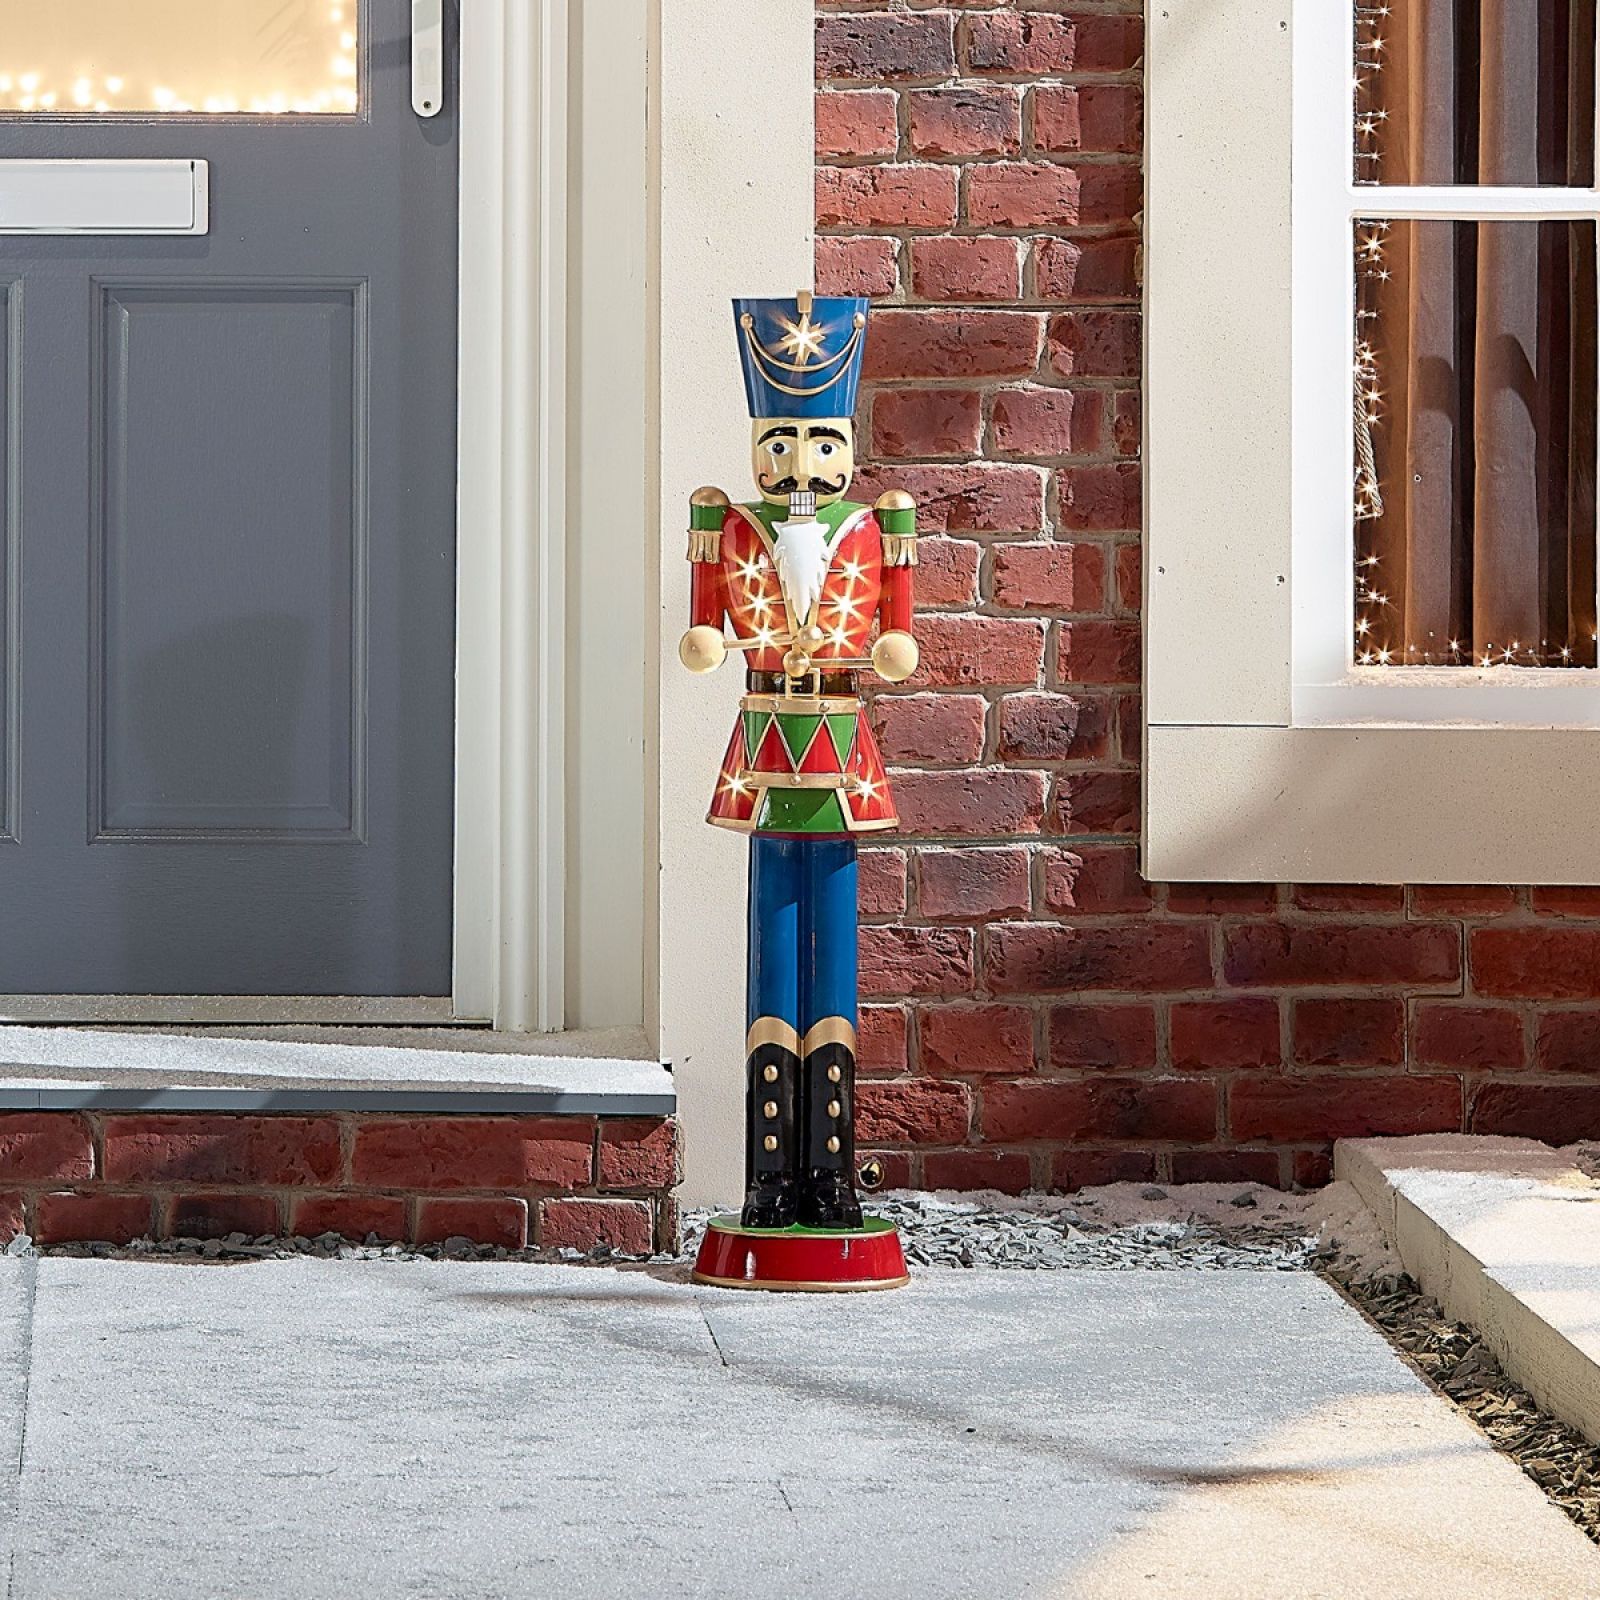 3ft Red Christmas Nutcracker with Drum